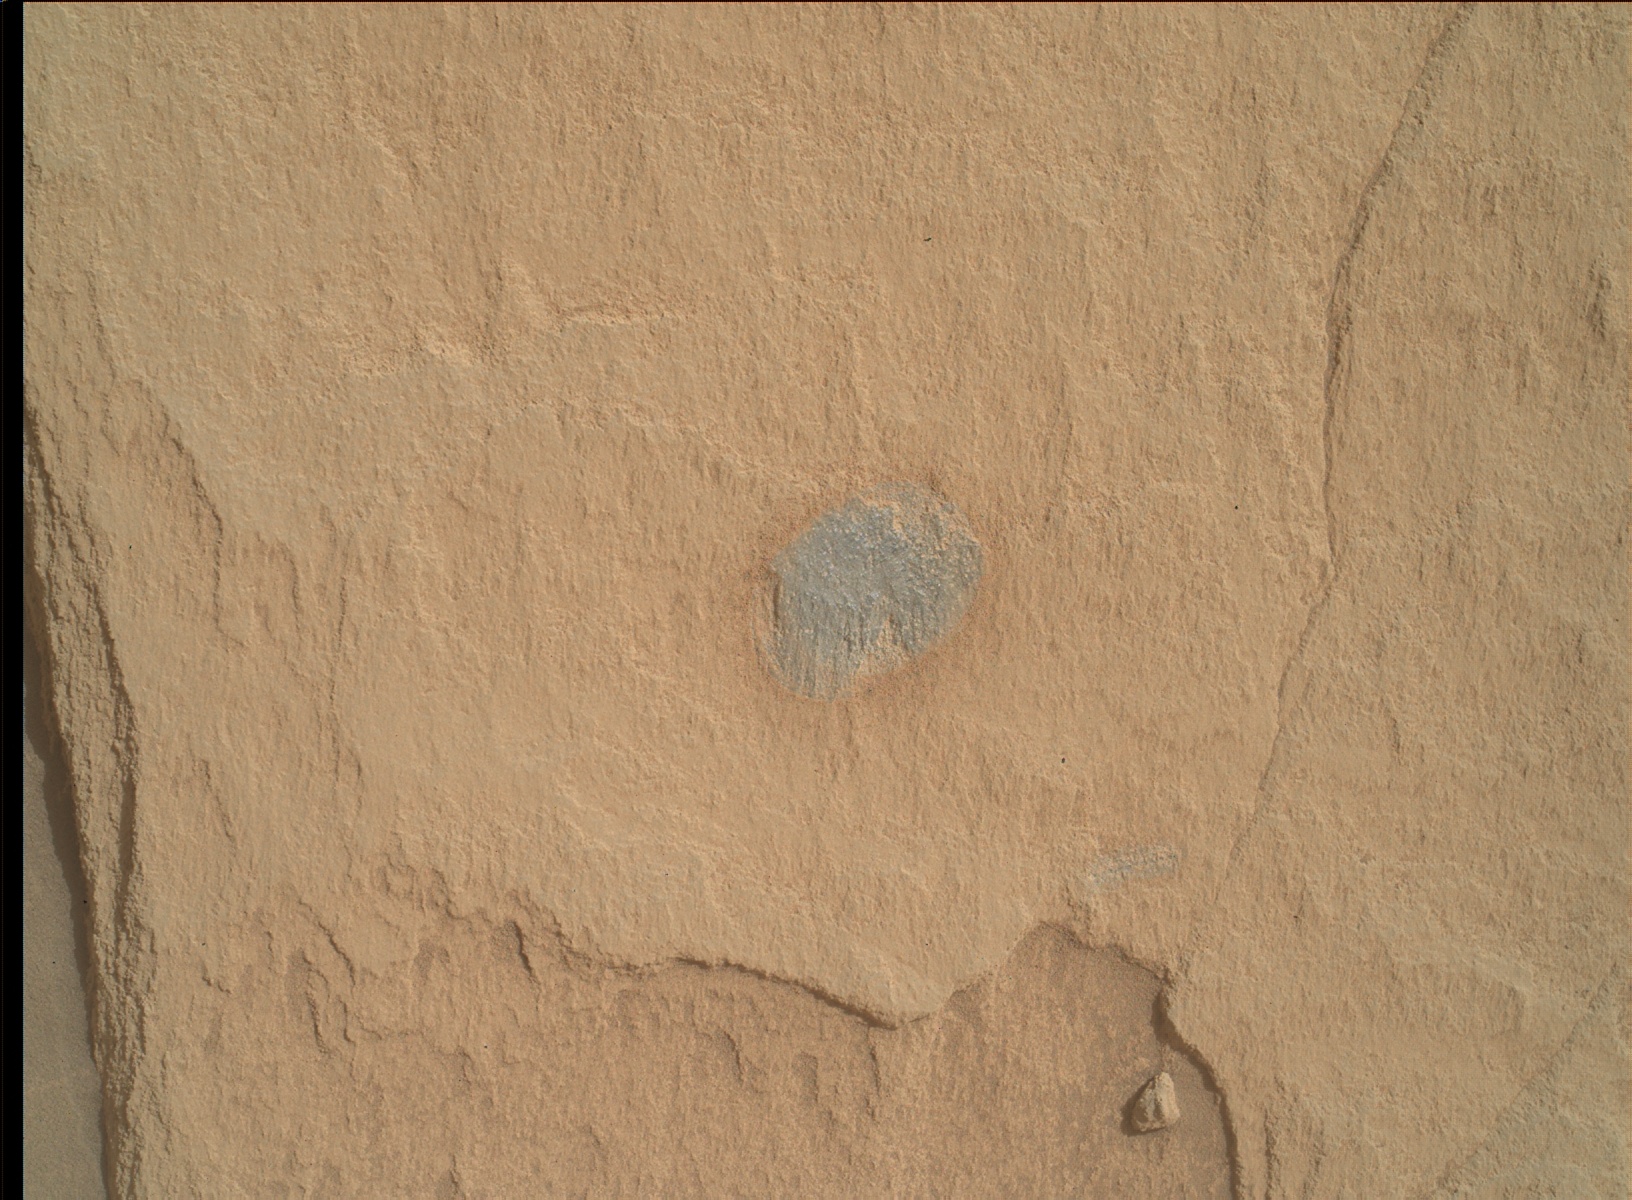 Nasa's Mars rover Curiosity acquired this image using its Mars Hand Lens Imager (MAHLI) on Sol 2704